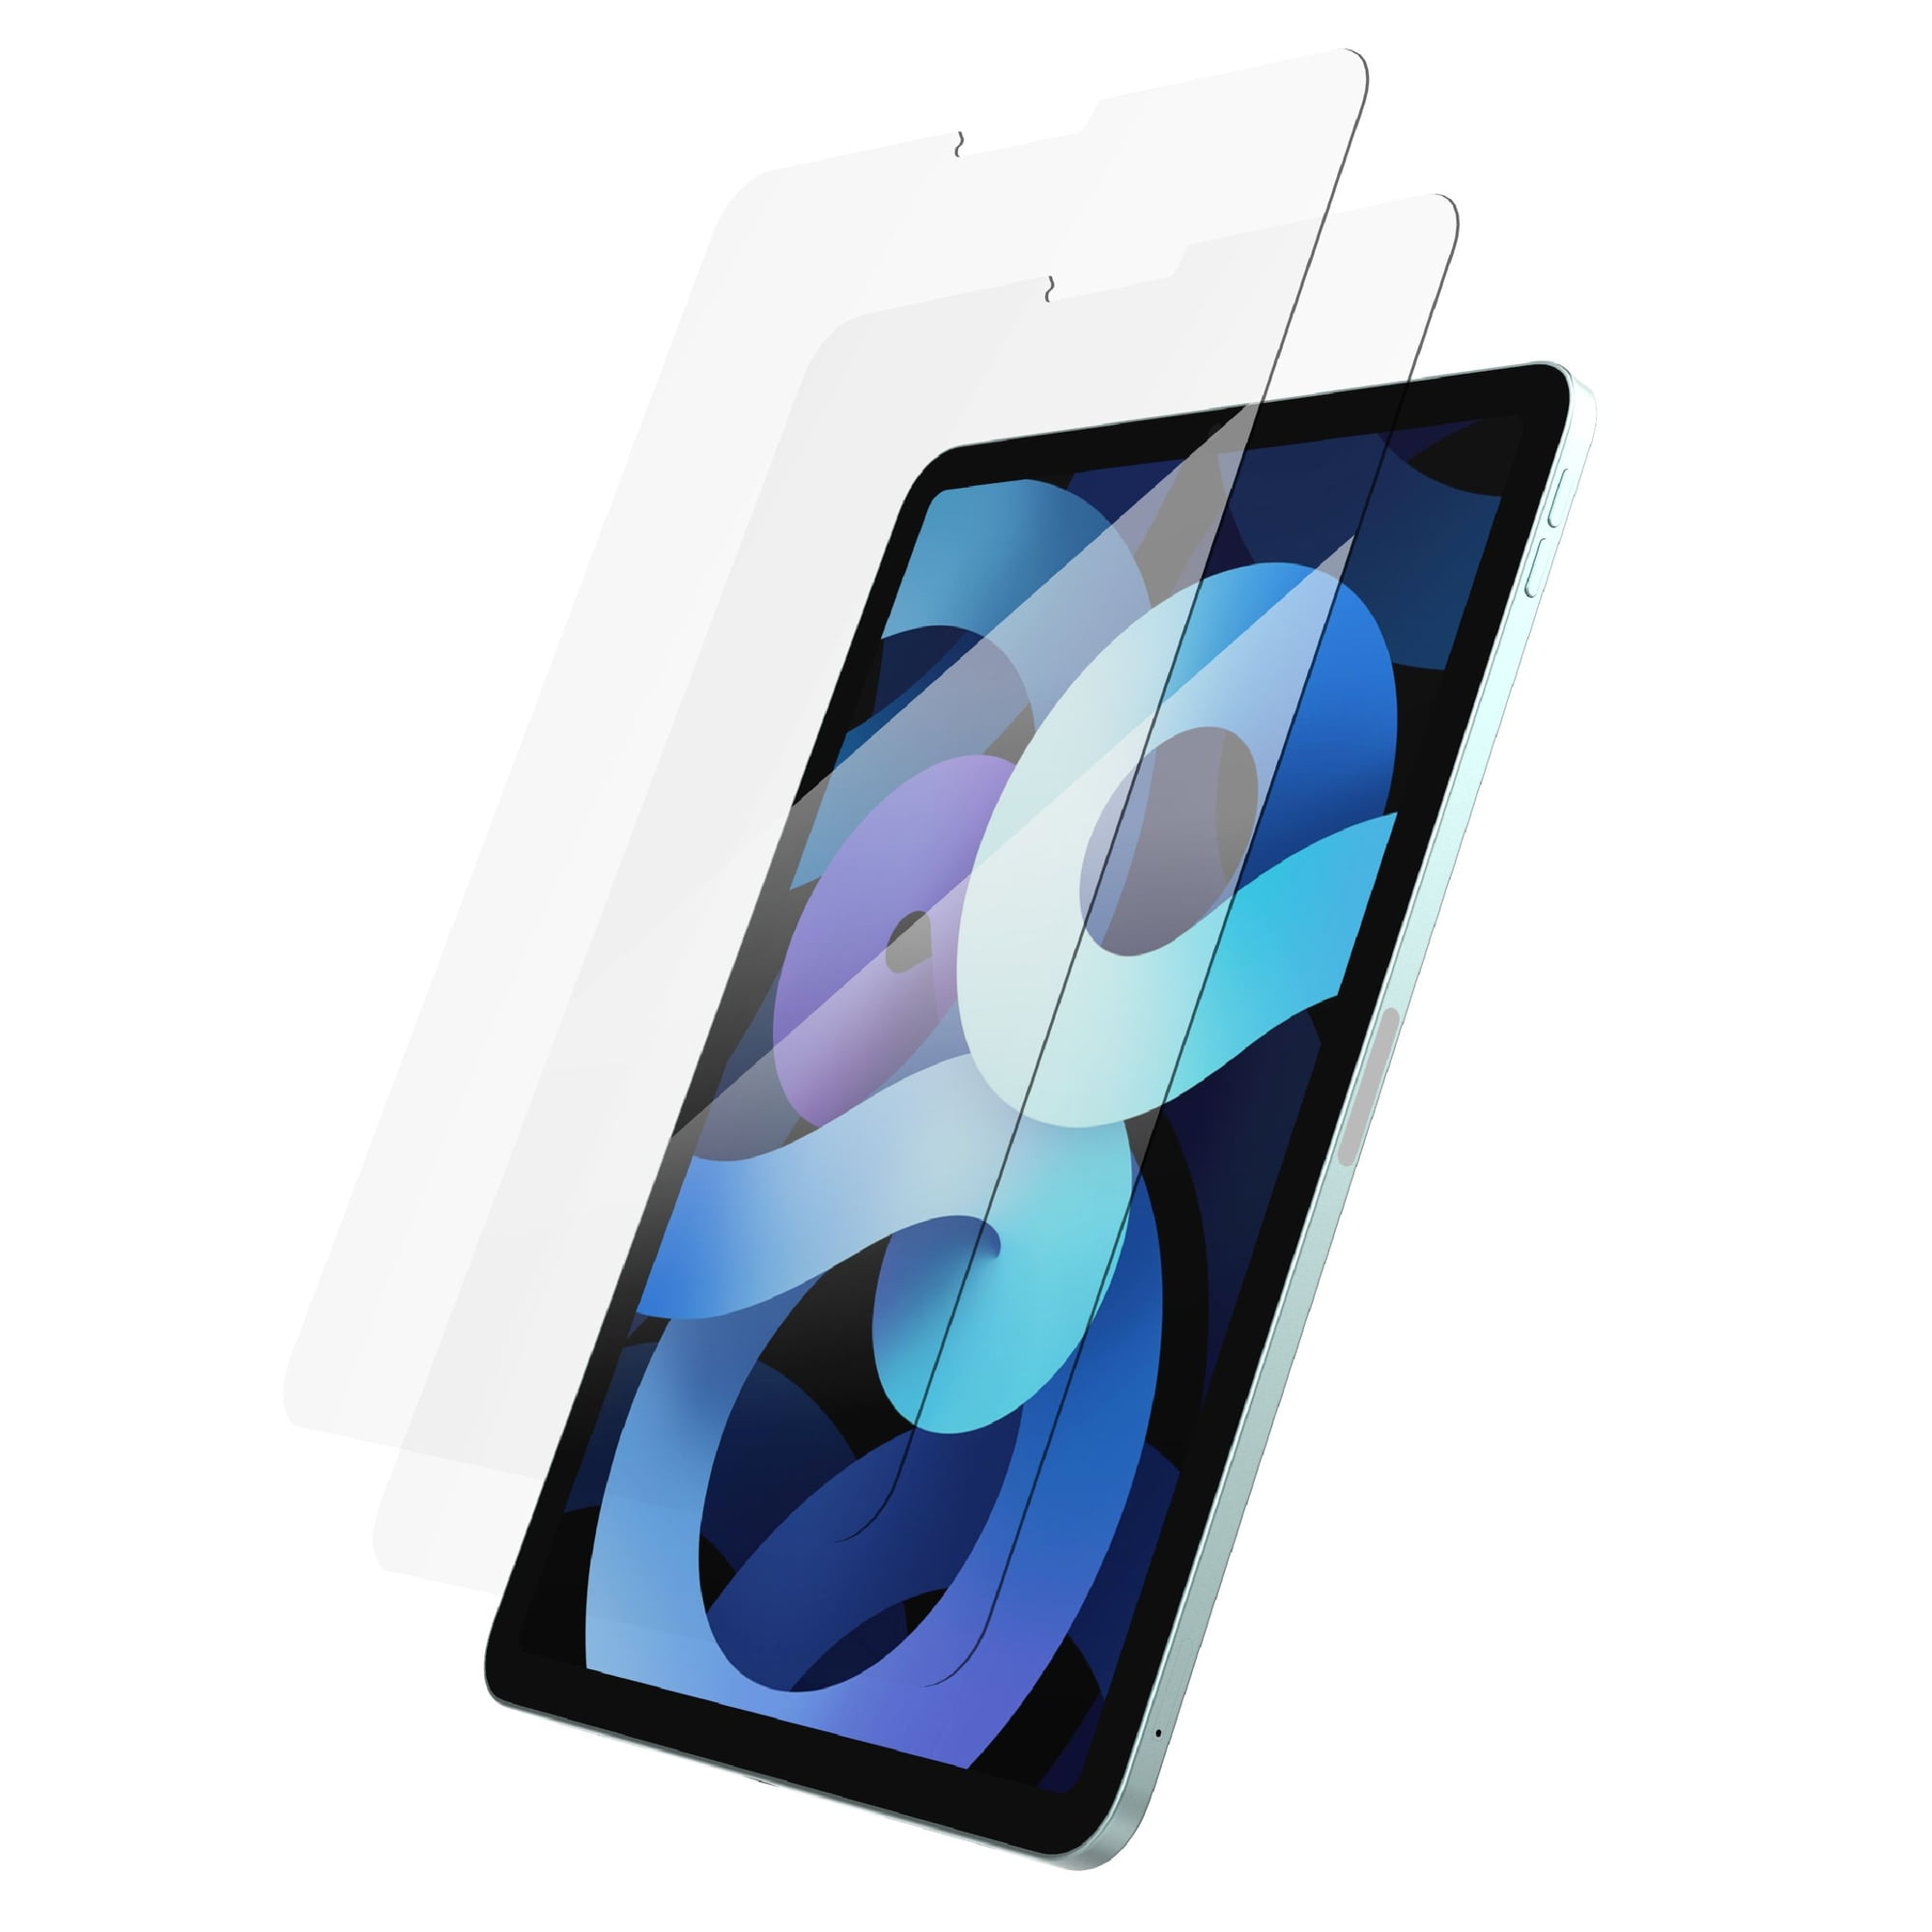 Tempered Glass Screen Protector iPad Air (2022) (2020) - Dealy